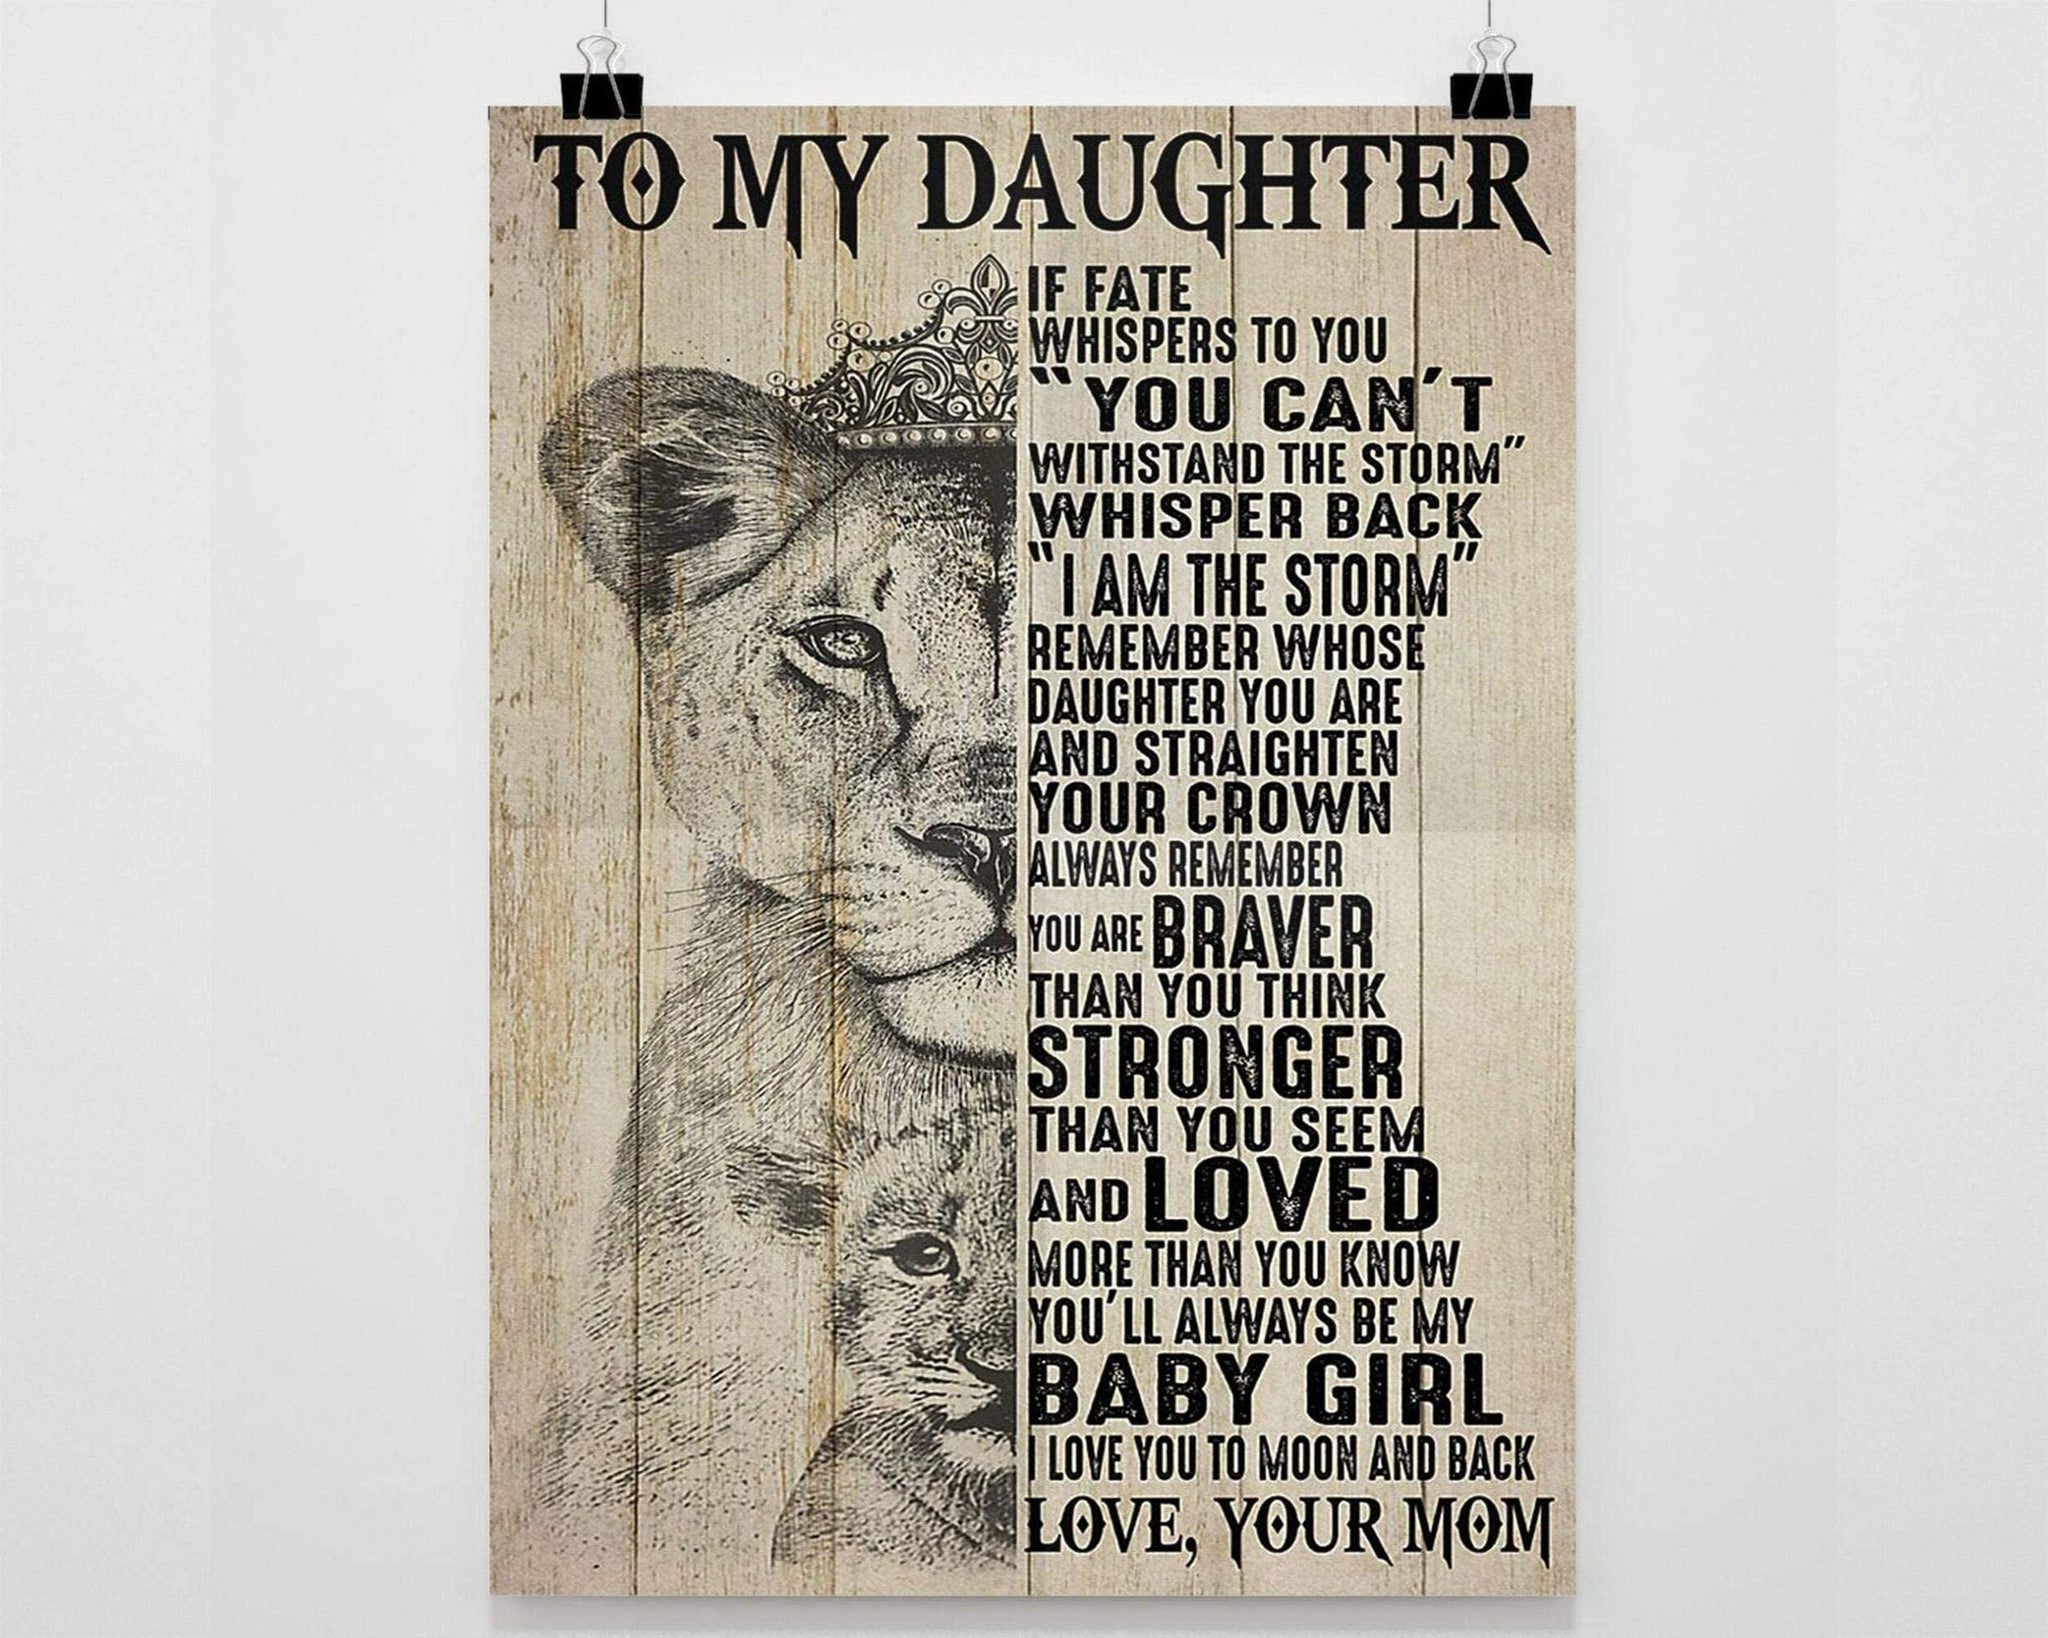 Lion To My Daughter I Am The Storm Remember Whose Daughter You Are And Straighten Your Crown Be My Baby Girl I Love You Love Your Mom